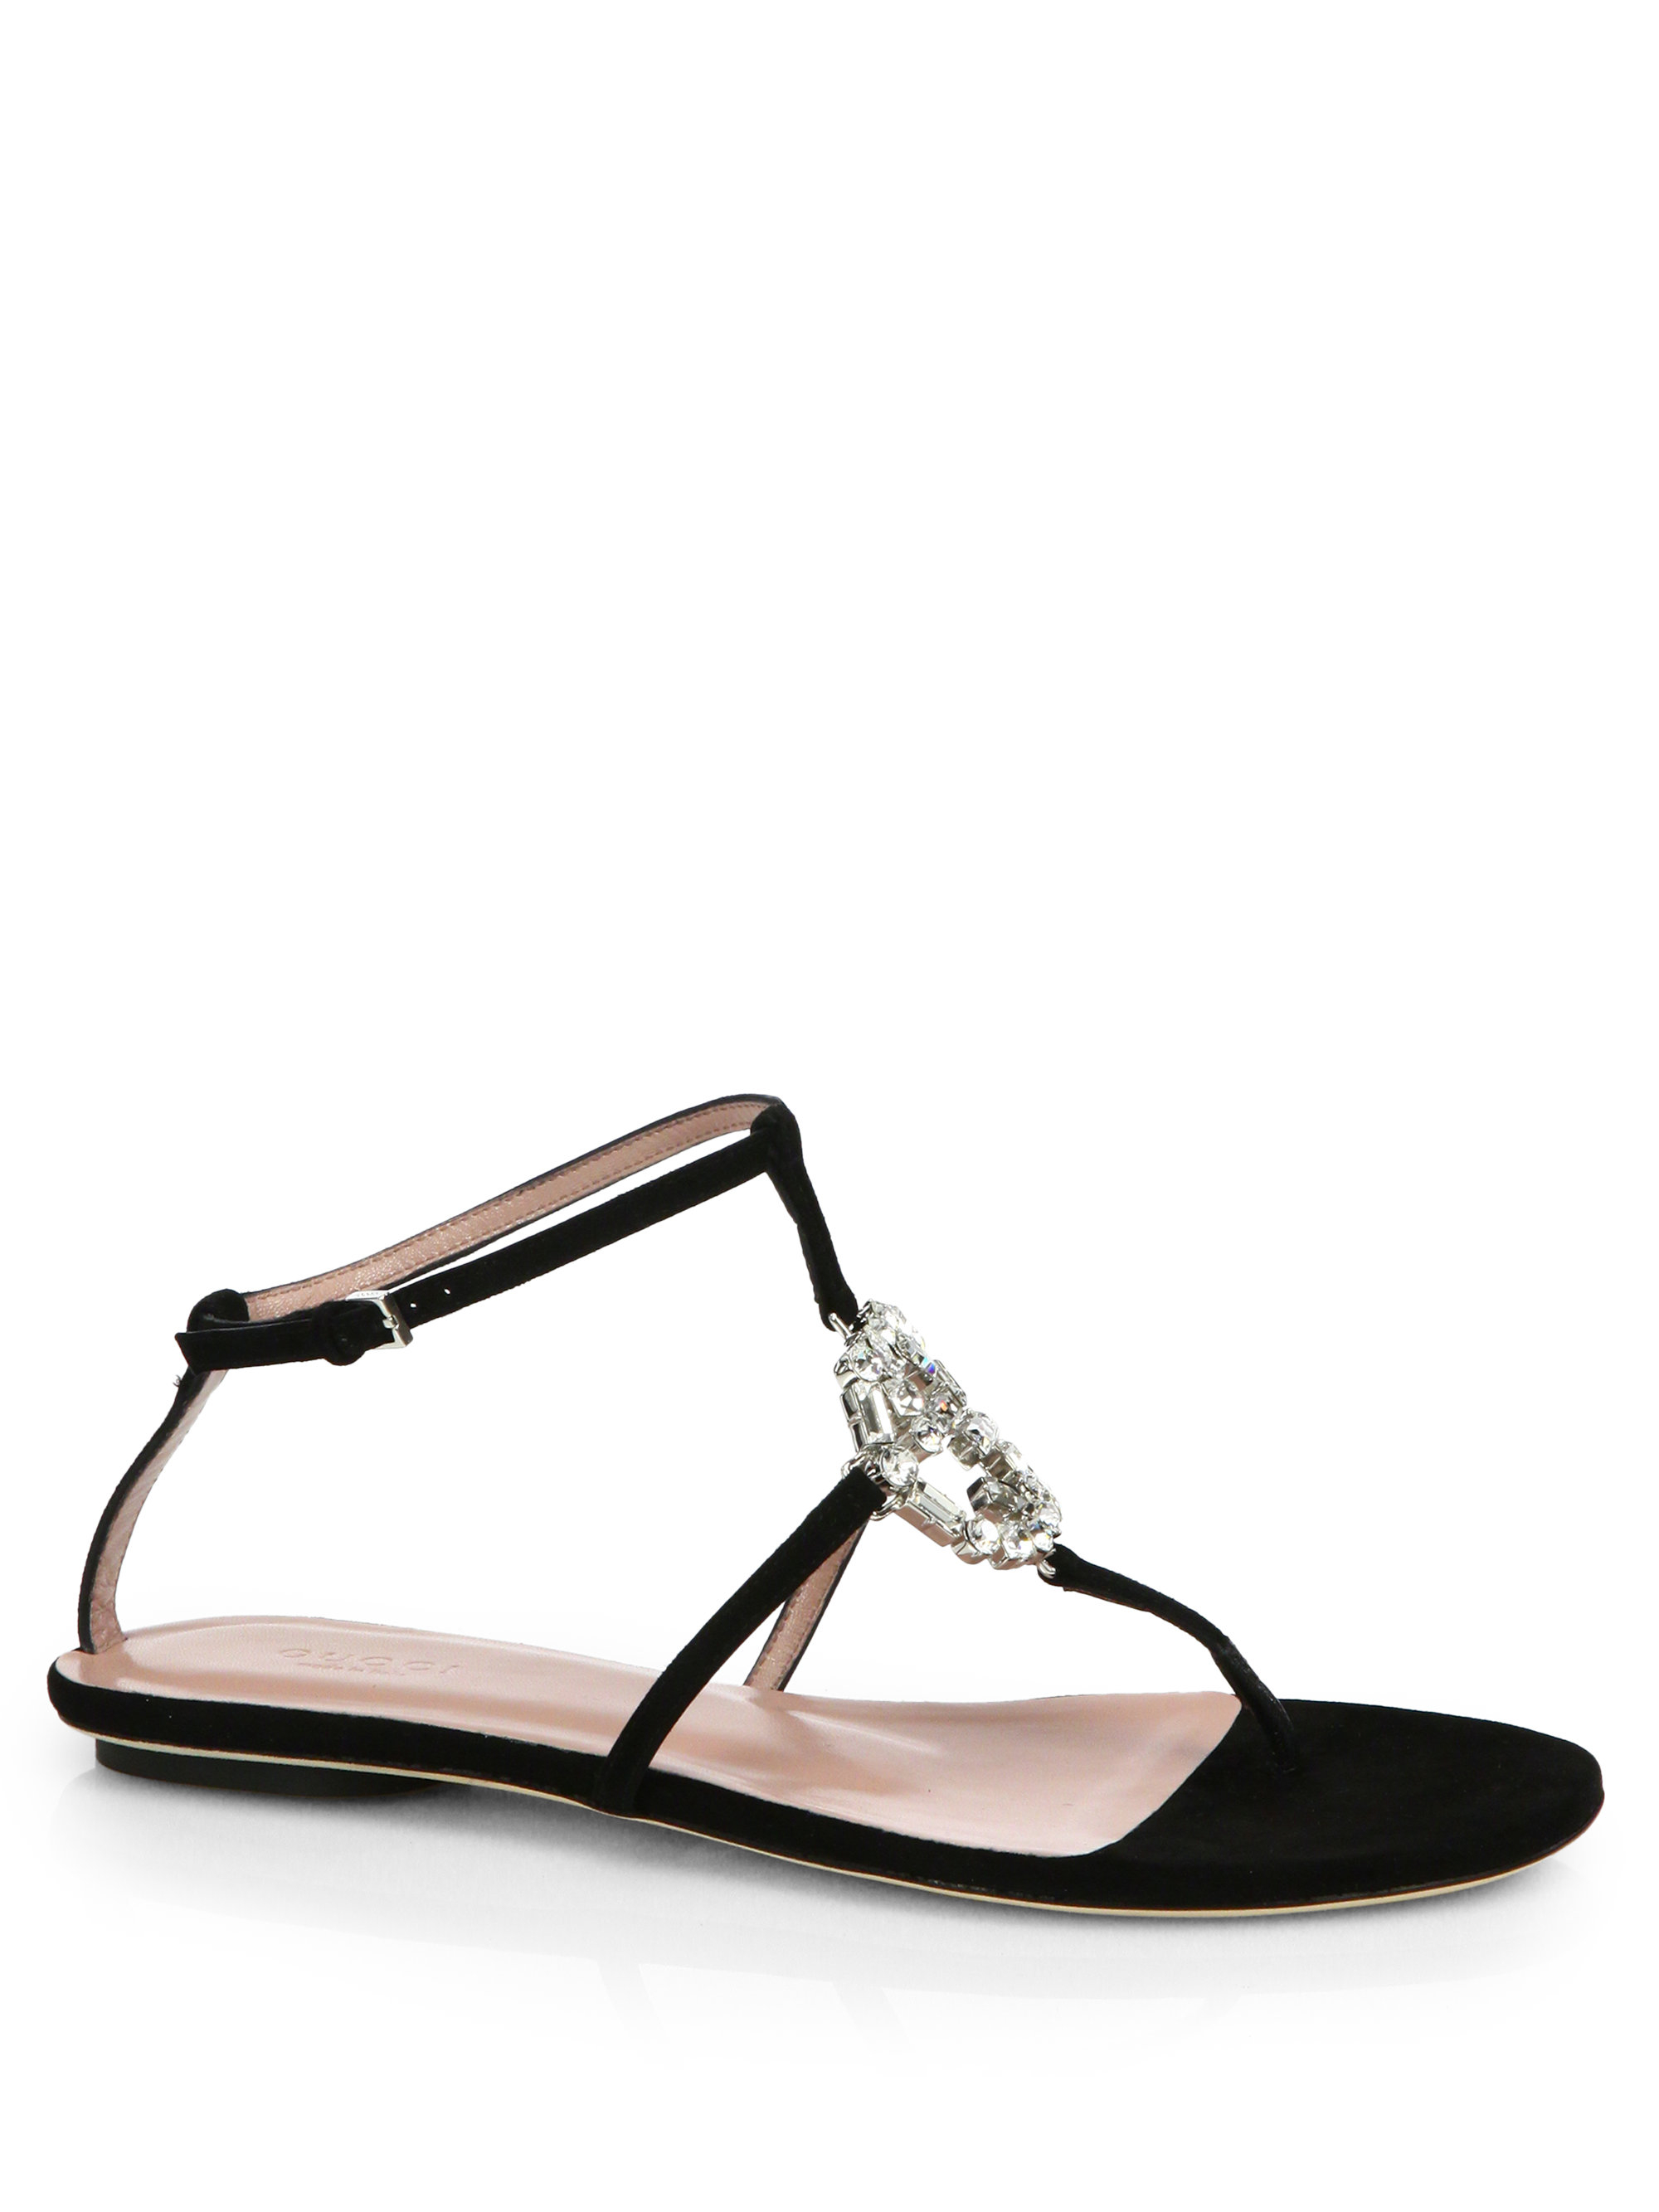 Gucci GG Crystal Leather and Suede Sandals in Black | Lyst